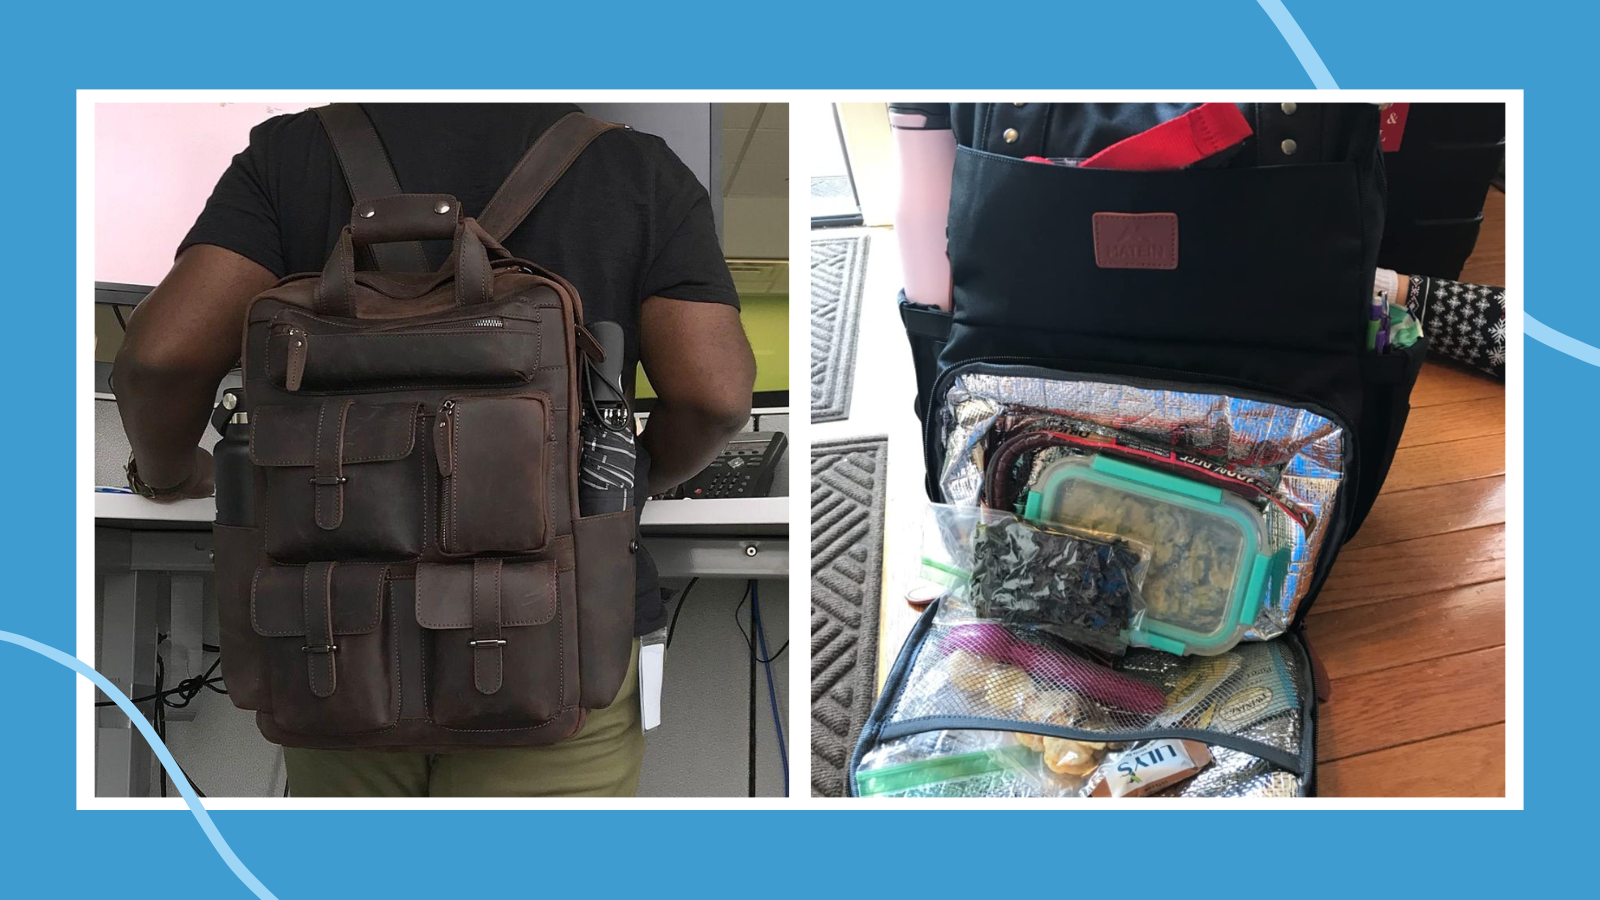 Collage of teacher backpacks, including brown leather bag and black bag with built-in lunch compartment